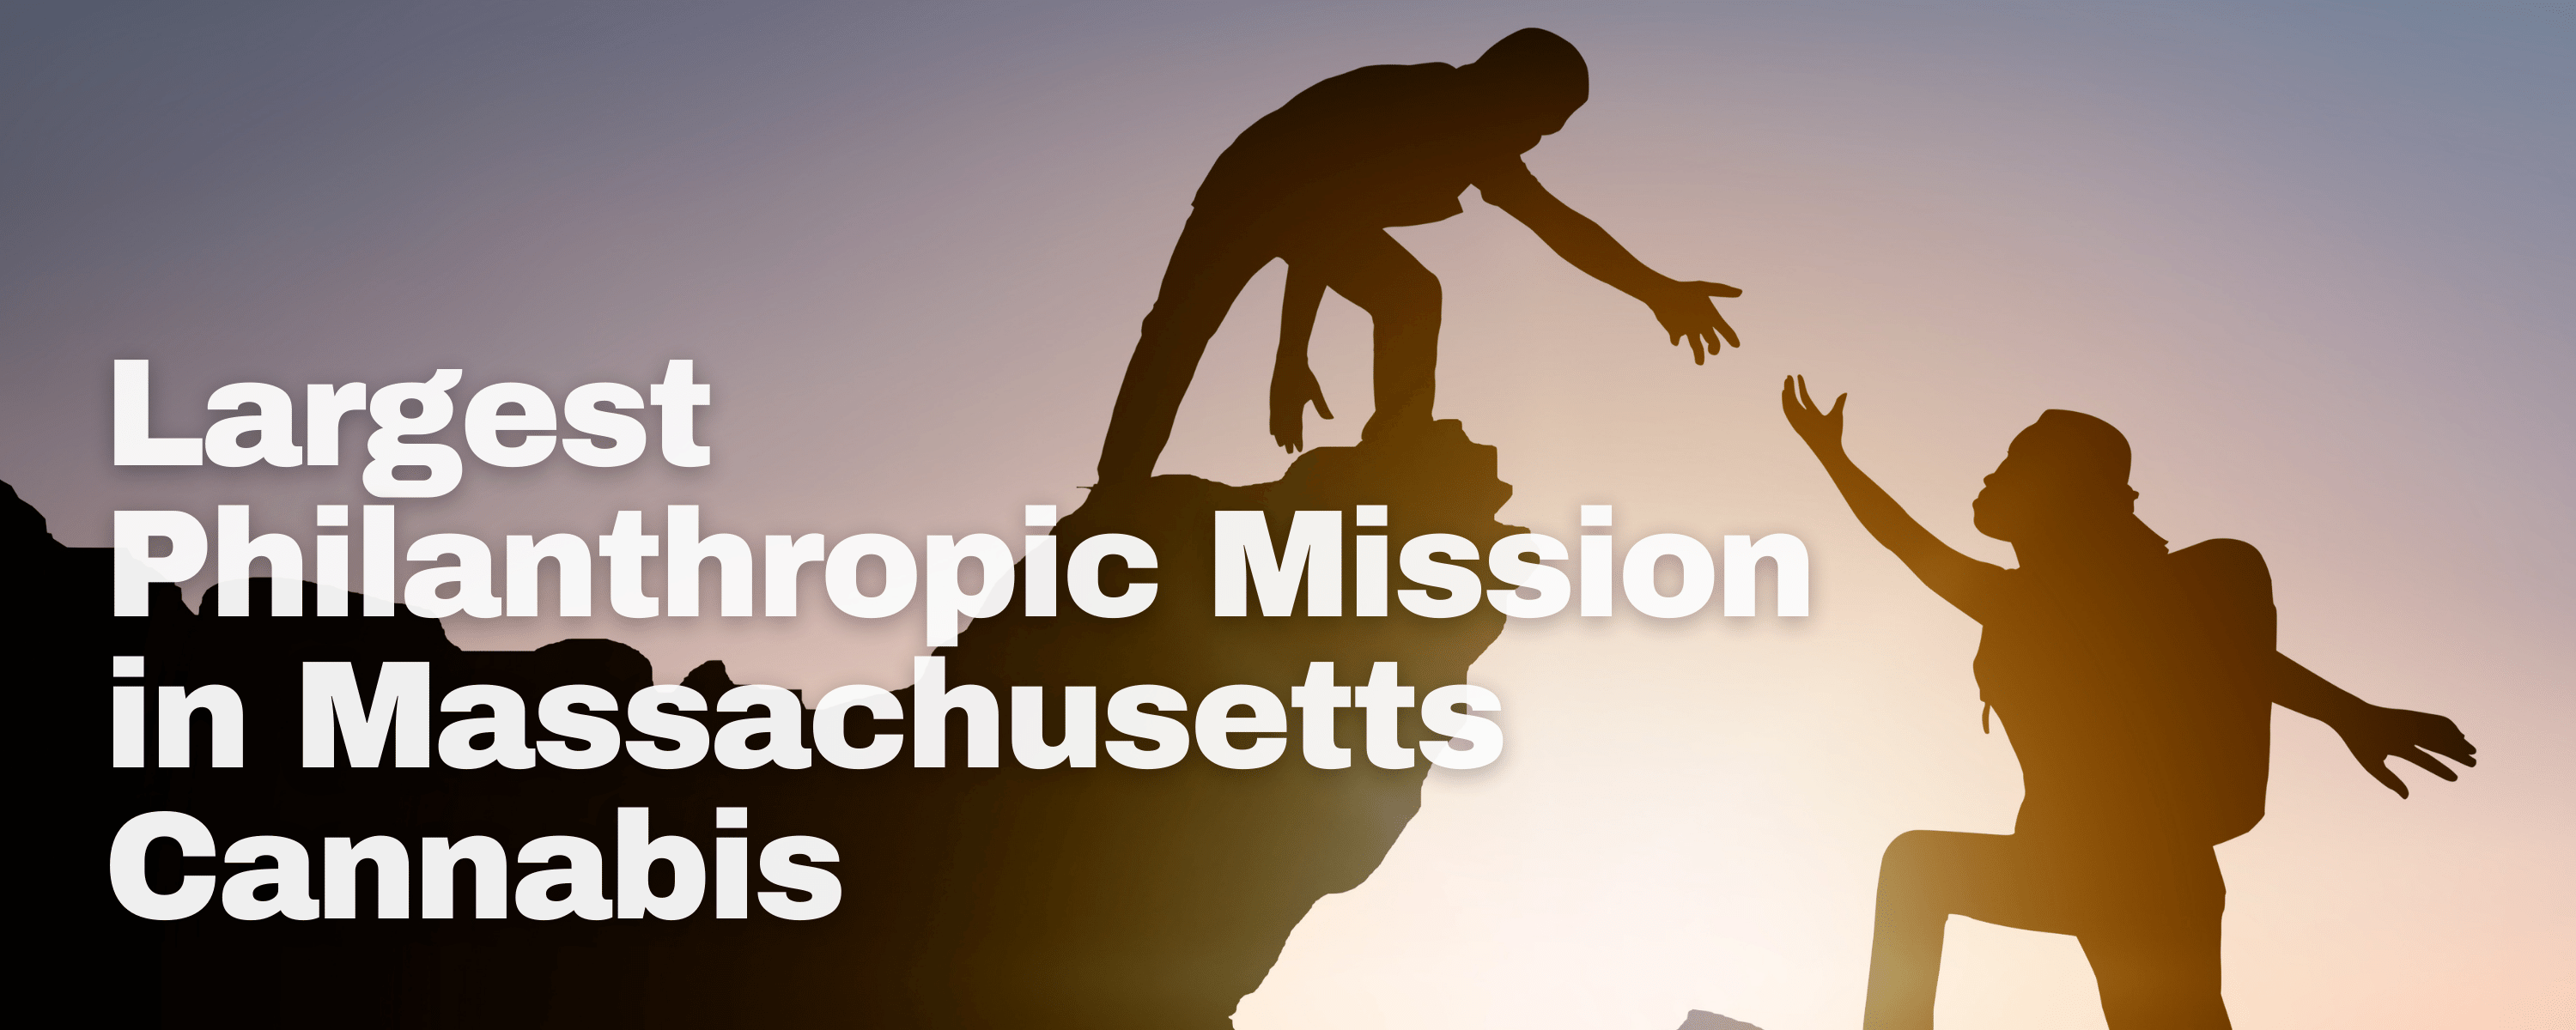 CNA Stores - Largest Philanthropic Mission in Massachusetts Cannabis